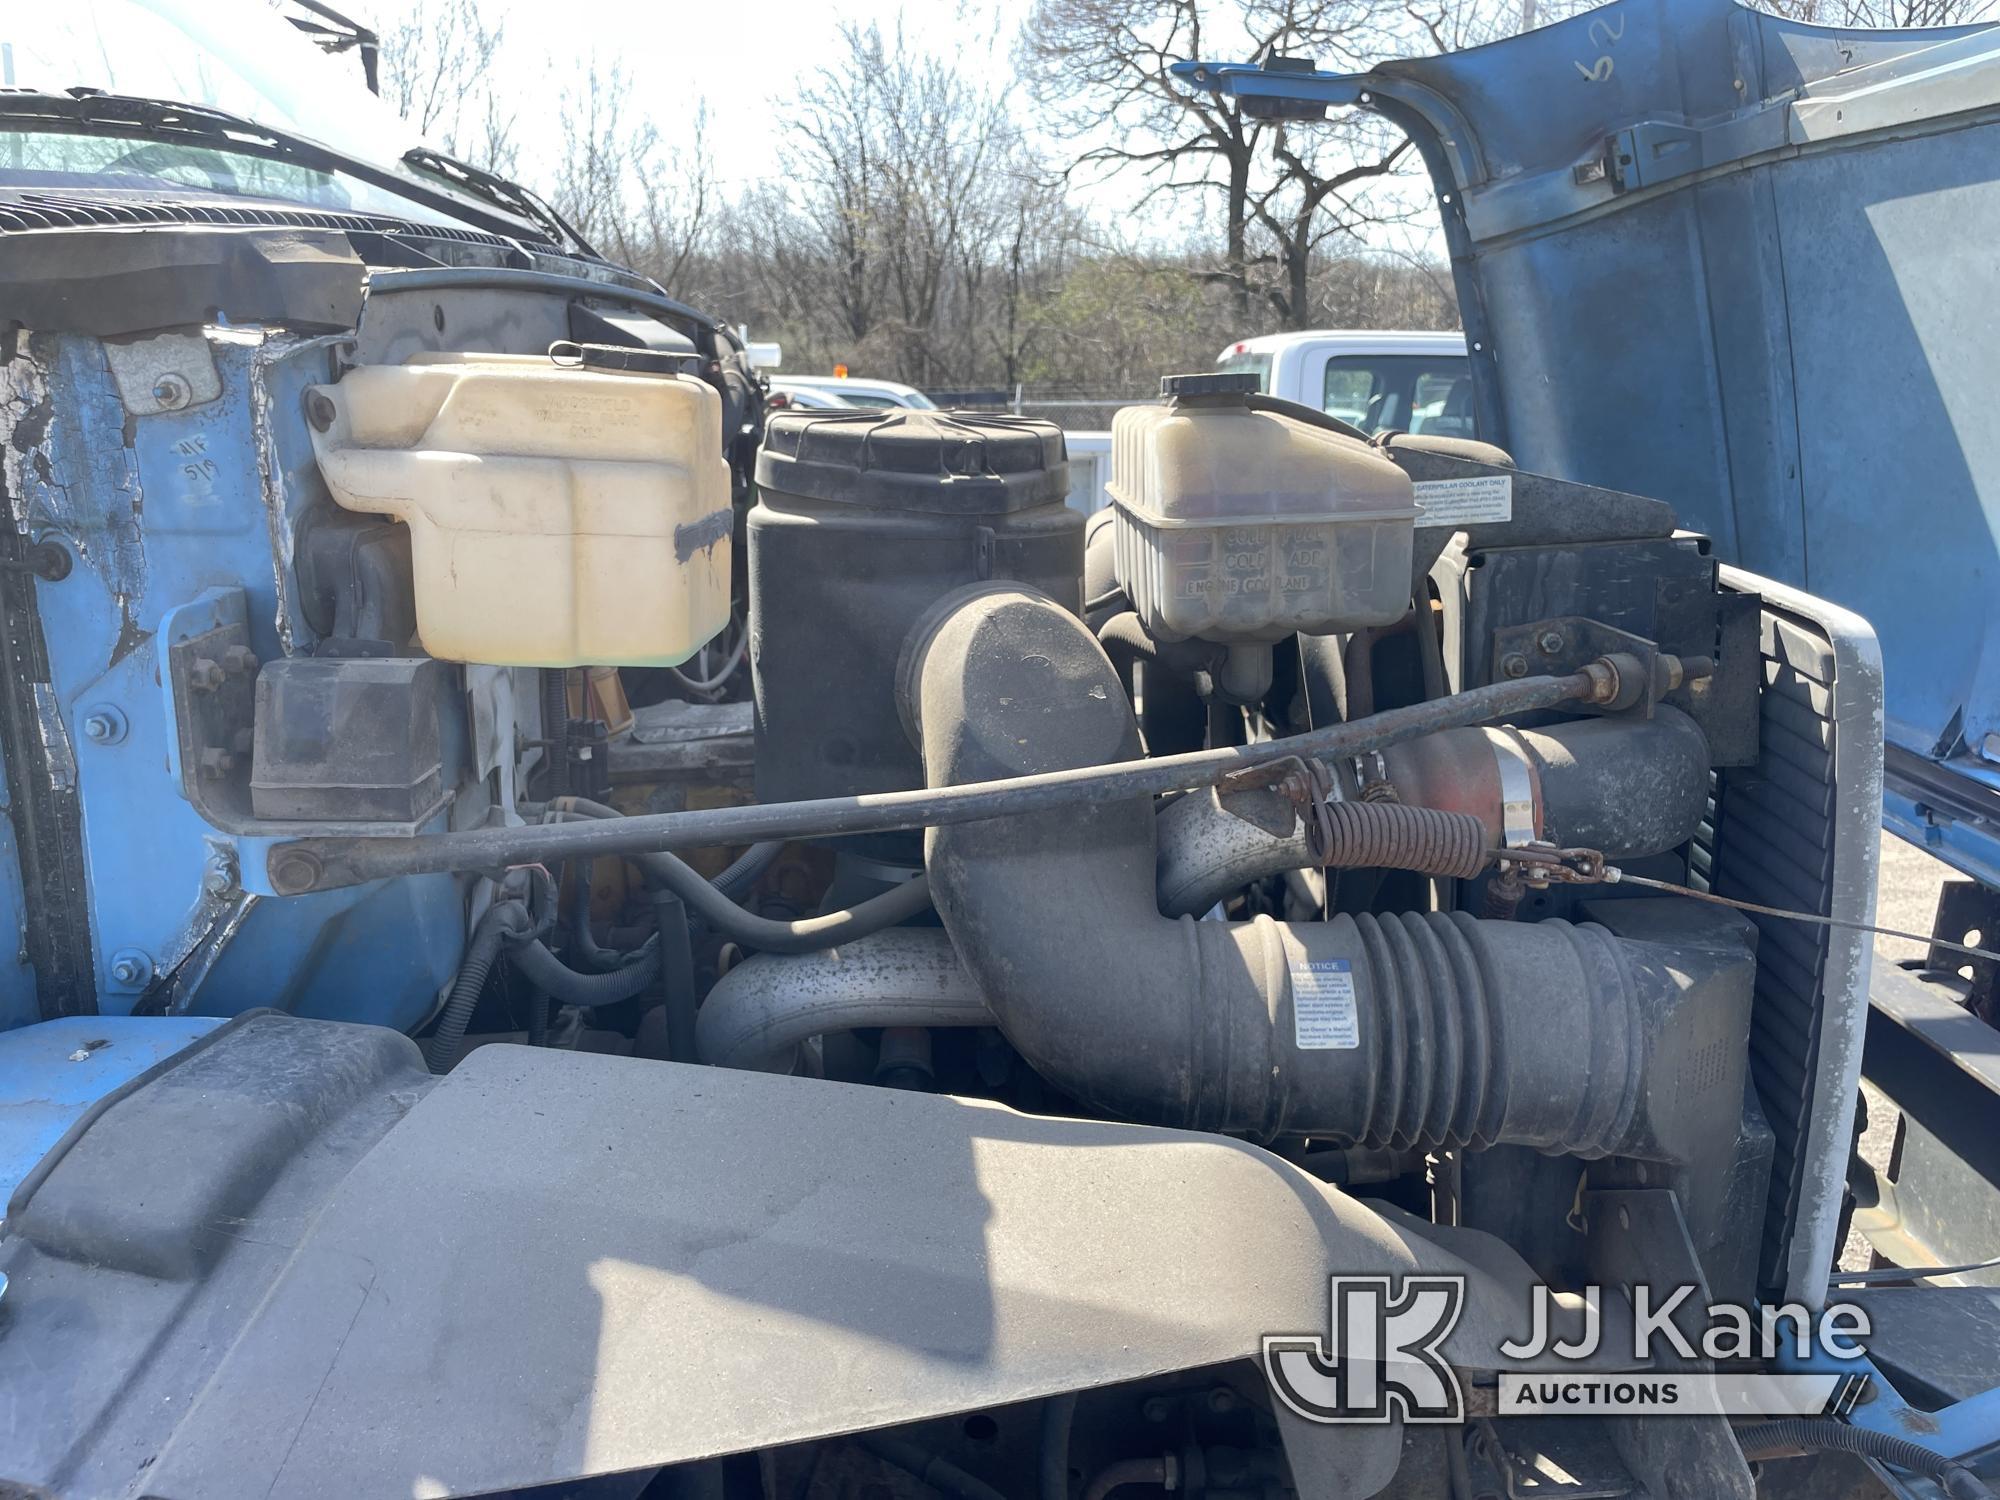 (Plymouth Meeting, PA) 1999 GMC C8500 Dump Truck Runs & Moves, Body & Rust Damage, Bad Tire, Must To